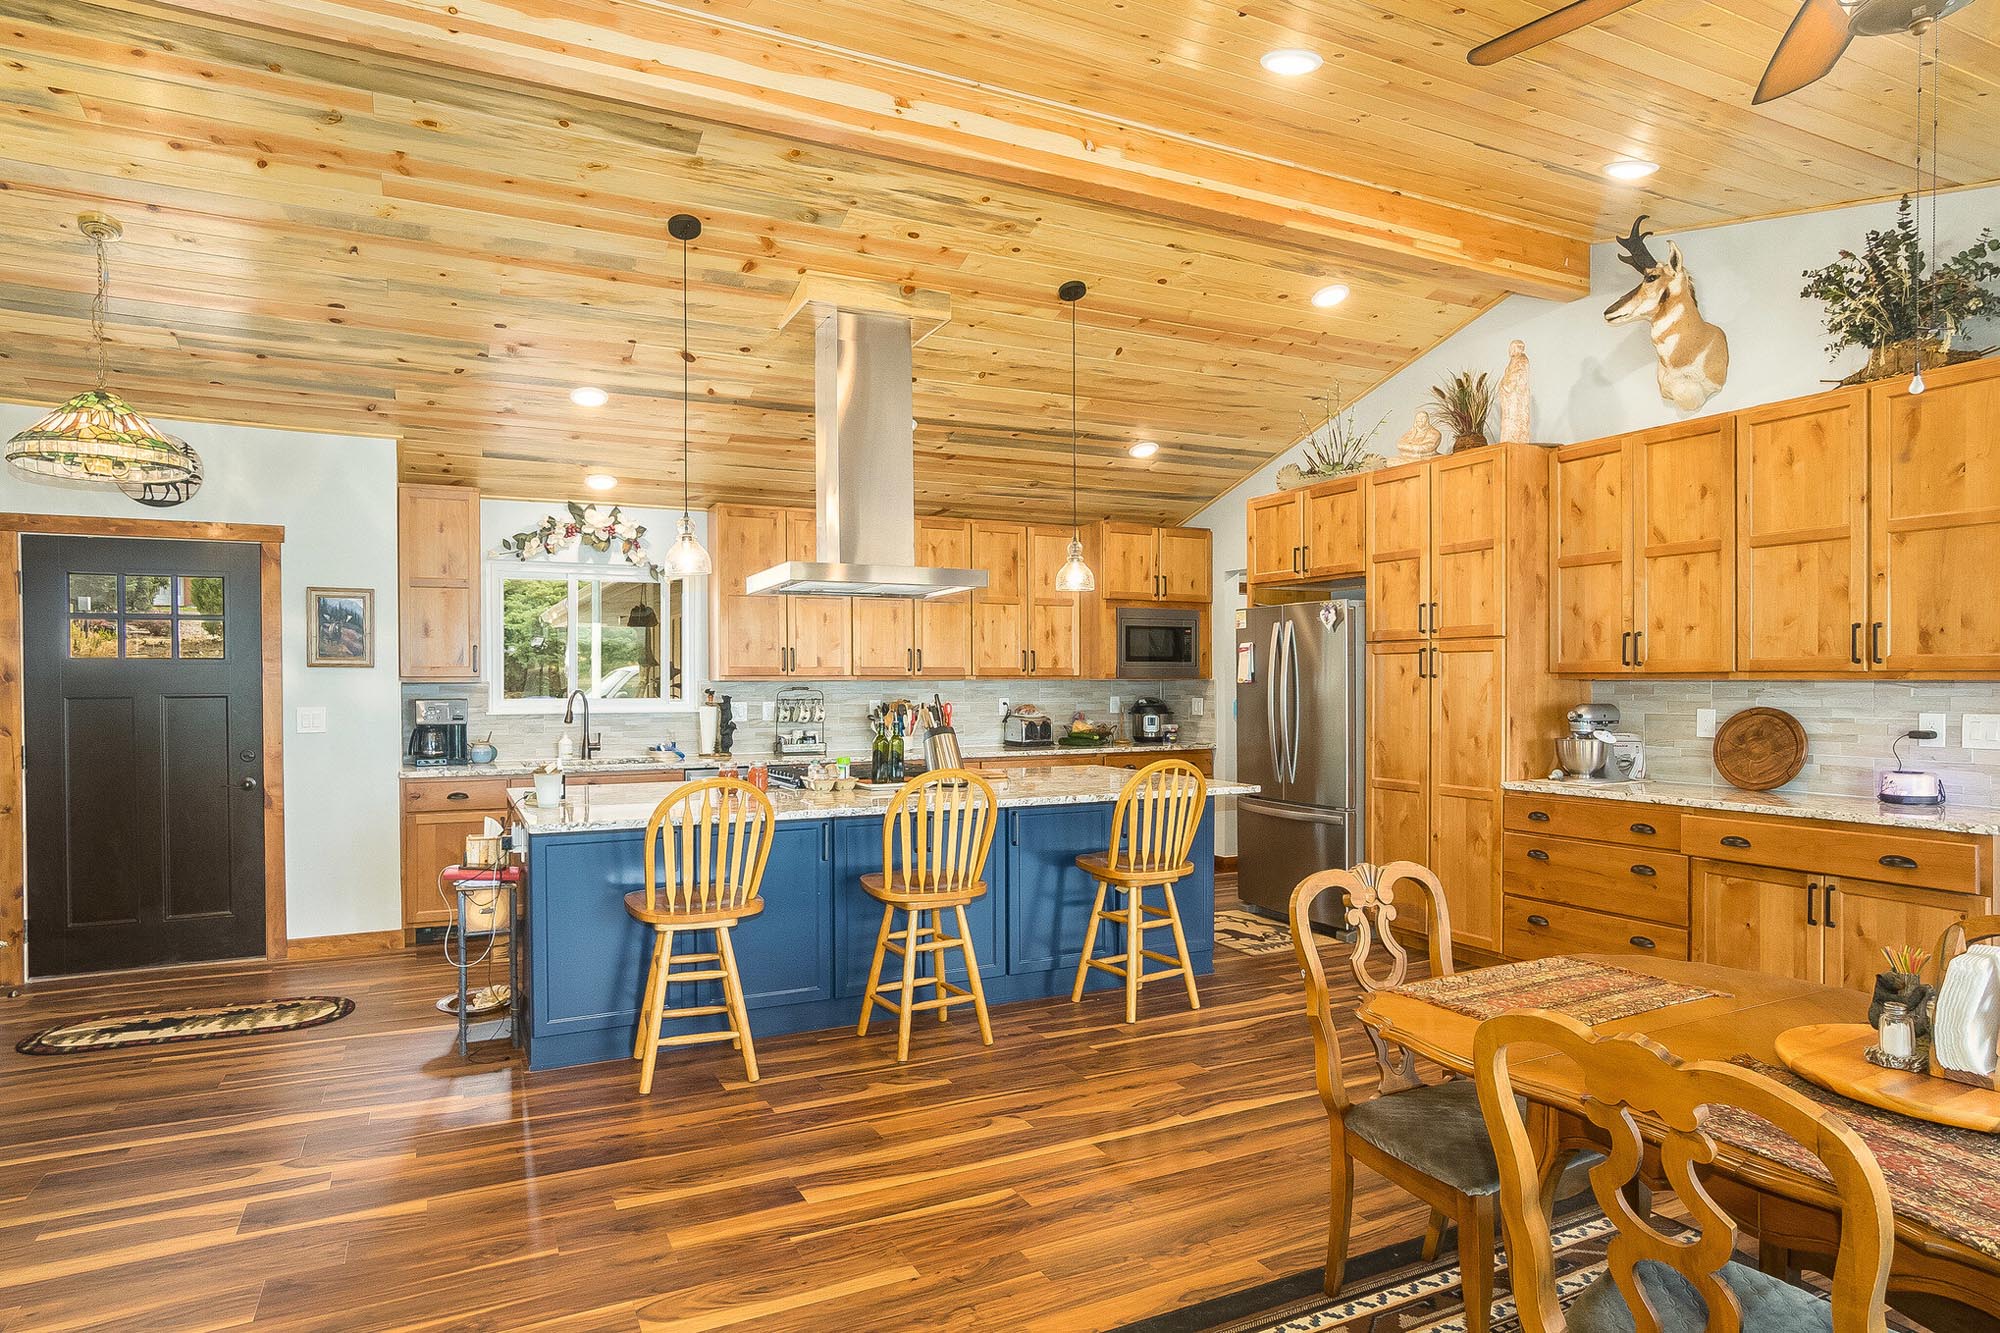 Rustic style dining room and kitchen with wooden cabinets and ceiling